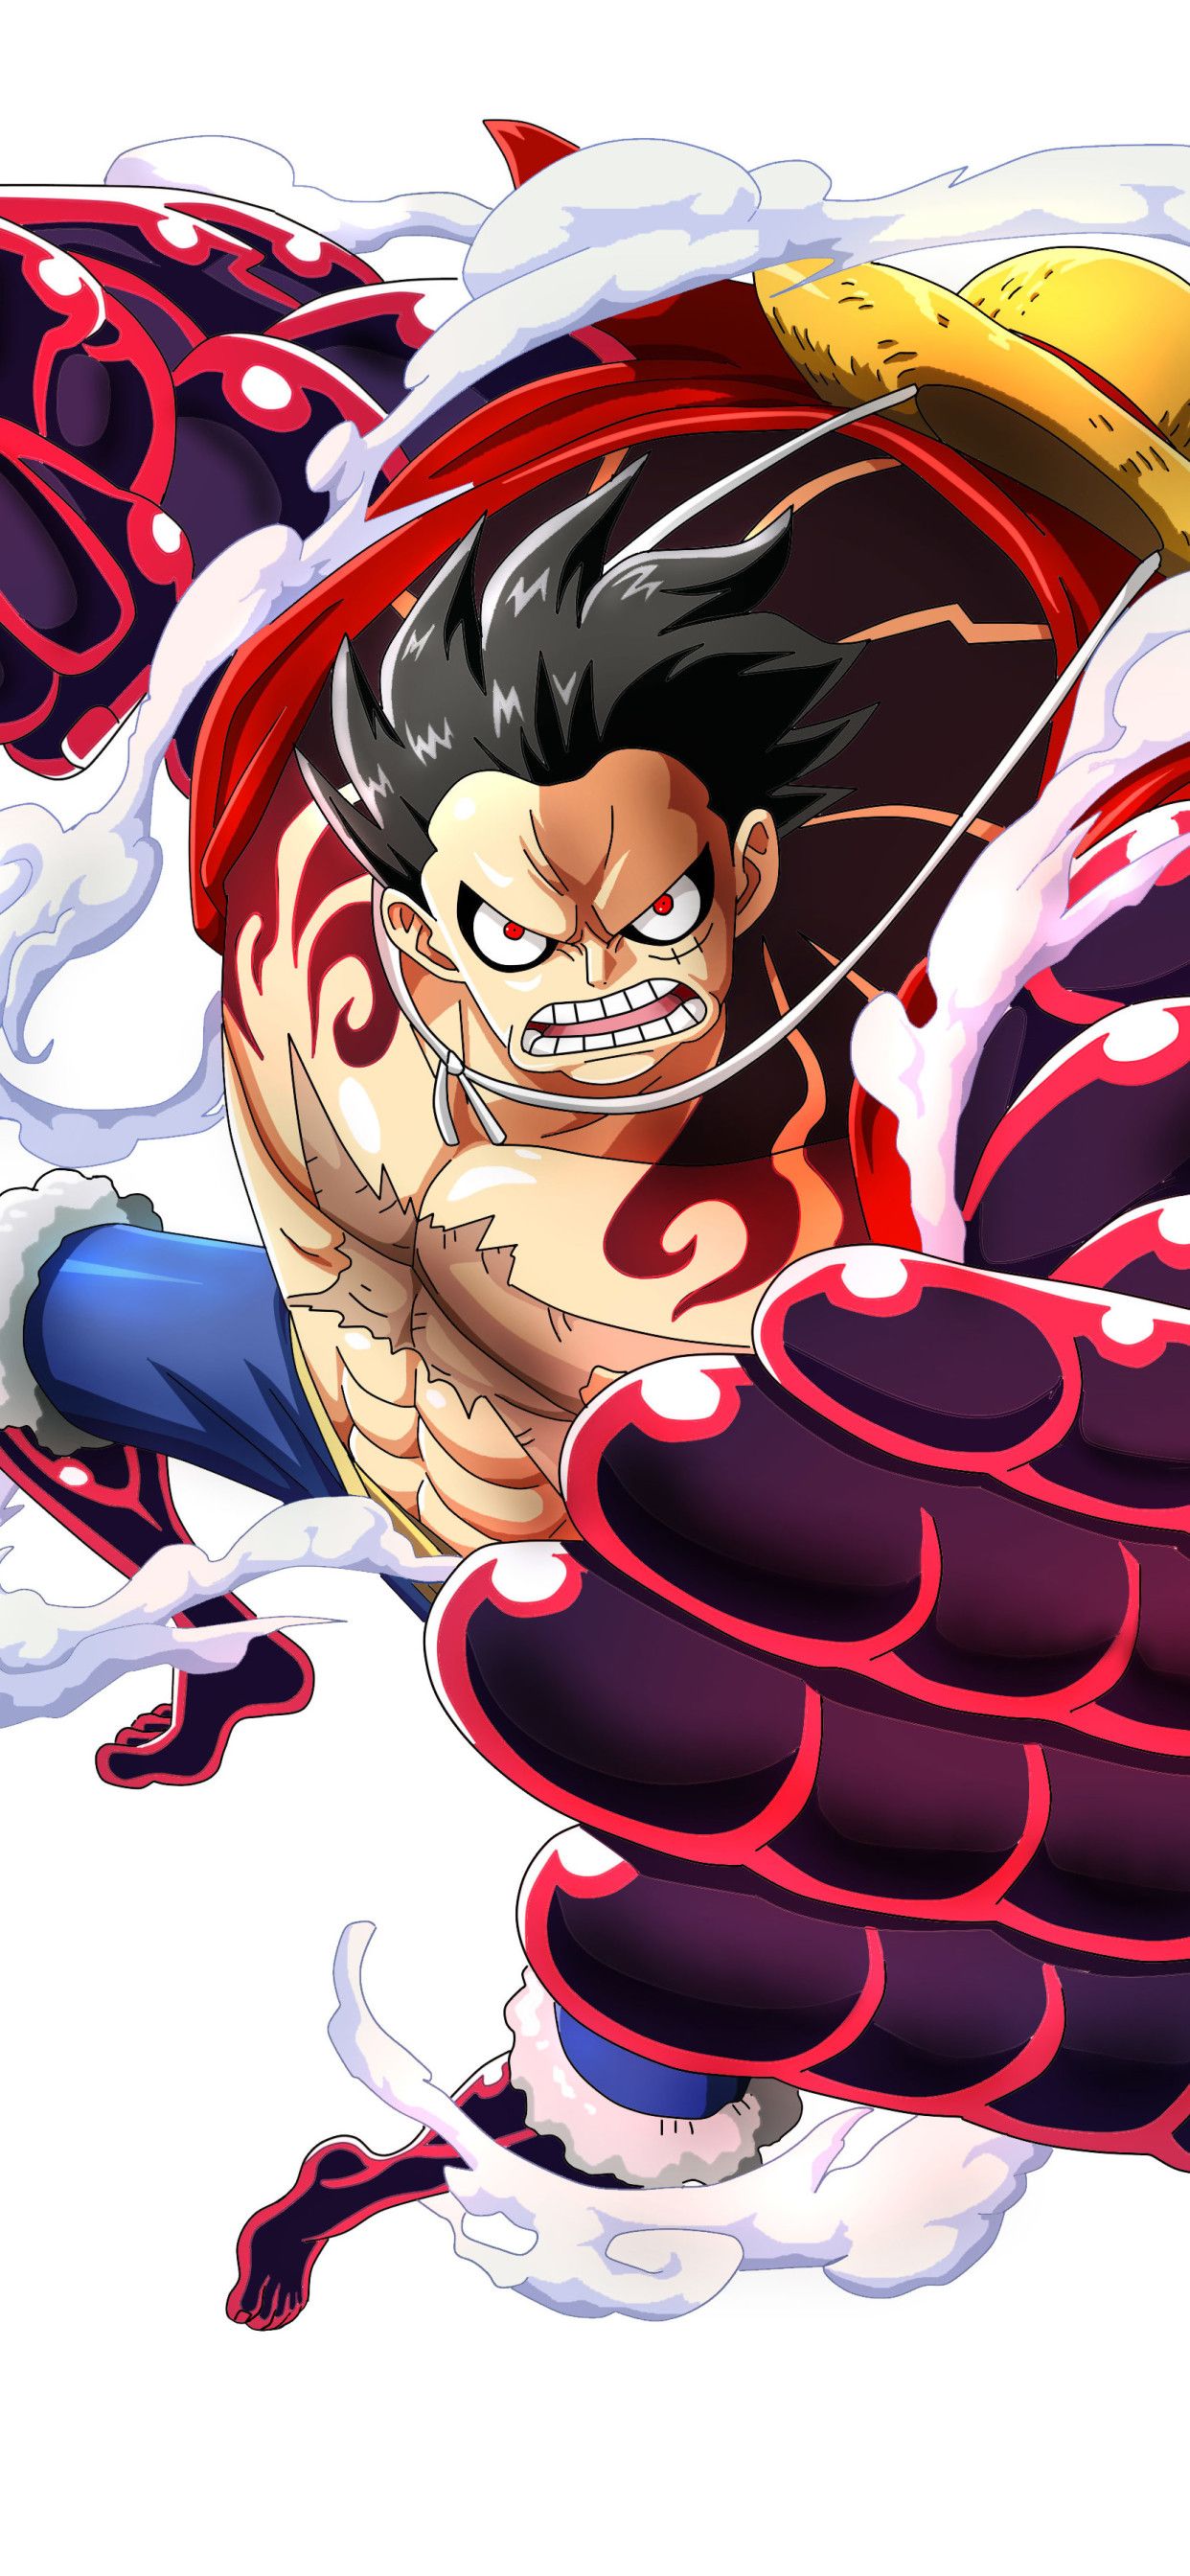 [Download 45+] Monkey D Luffy Wallpaper Hd Android Anime One Piece